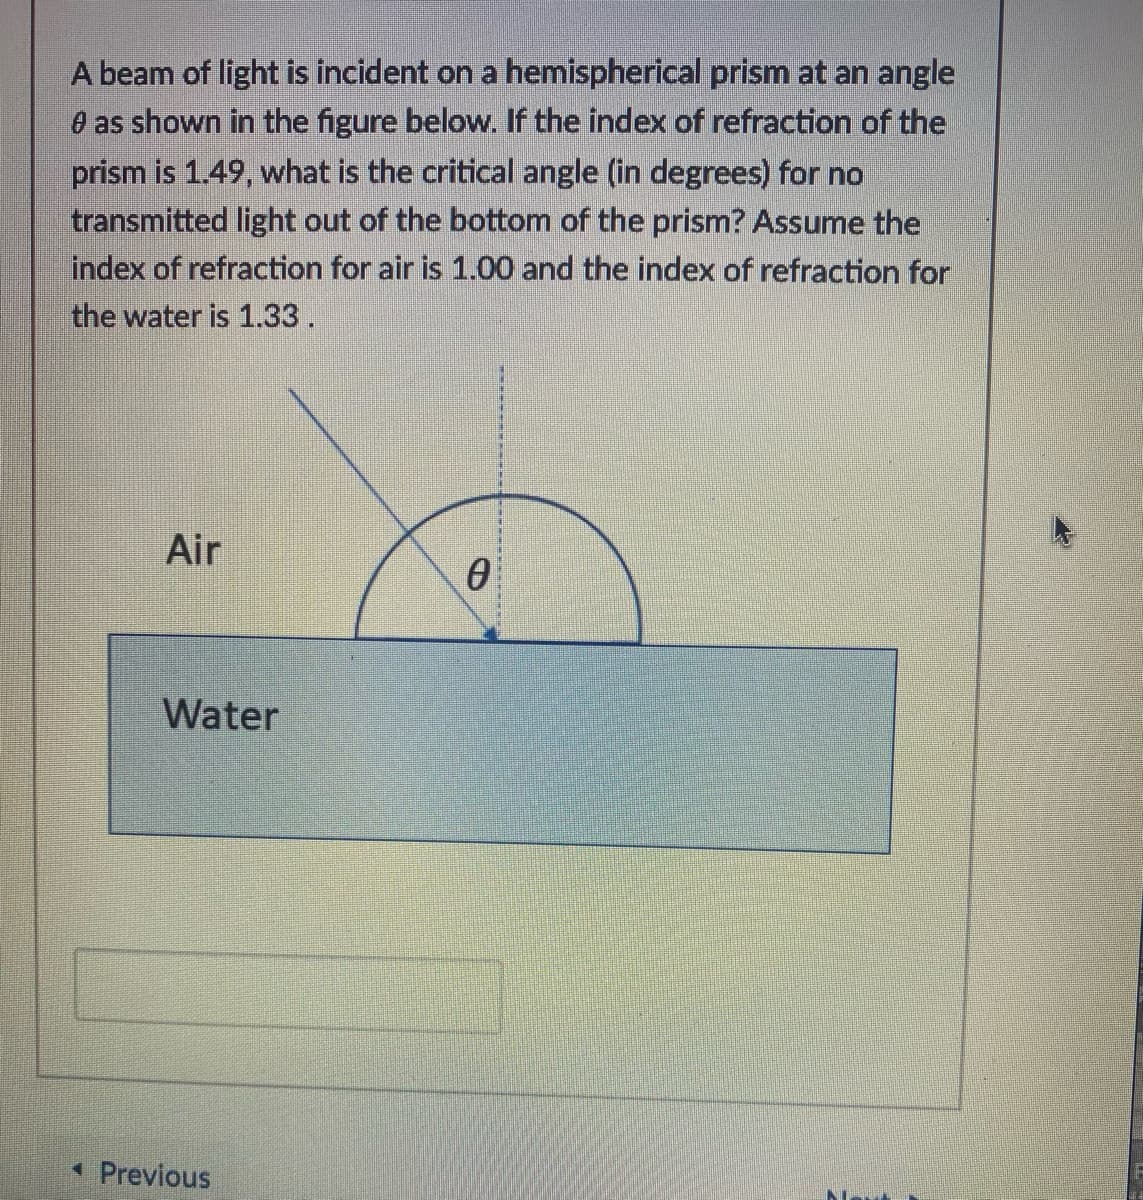 A beam of light is incident on a hemispherical prism at an angle
O as shown in the figure below. If the index of refraction of the
prism is 1.49, what is the critical angle (in degrees) for no
transmitted light out of the bottom of the prism? Assume the
index of refraction for air is 1.00 and the index of refraction for
the water is 1.33.
Air
Water
* Previous
